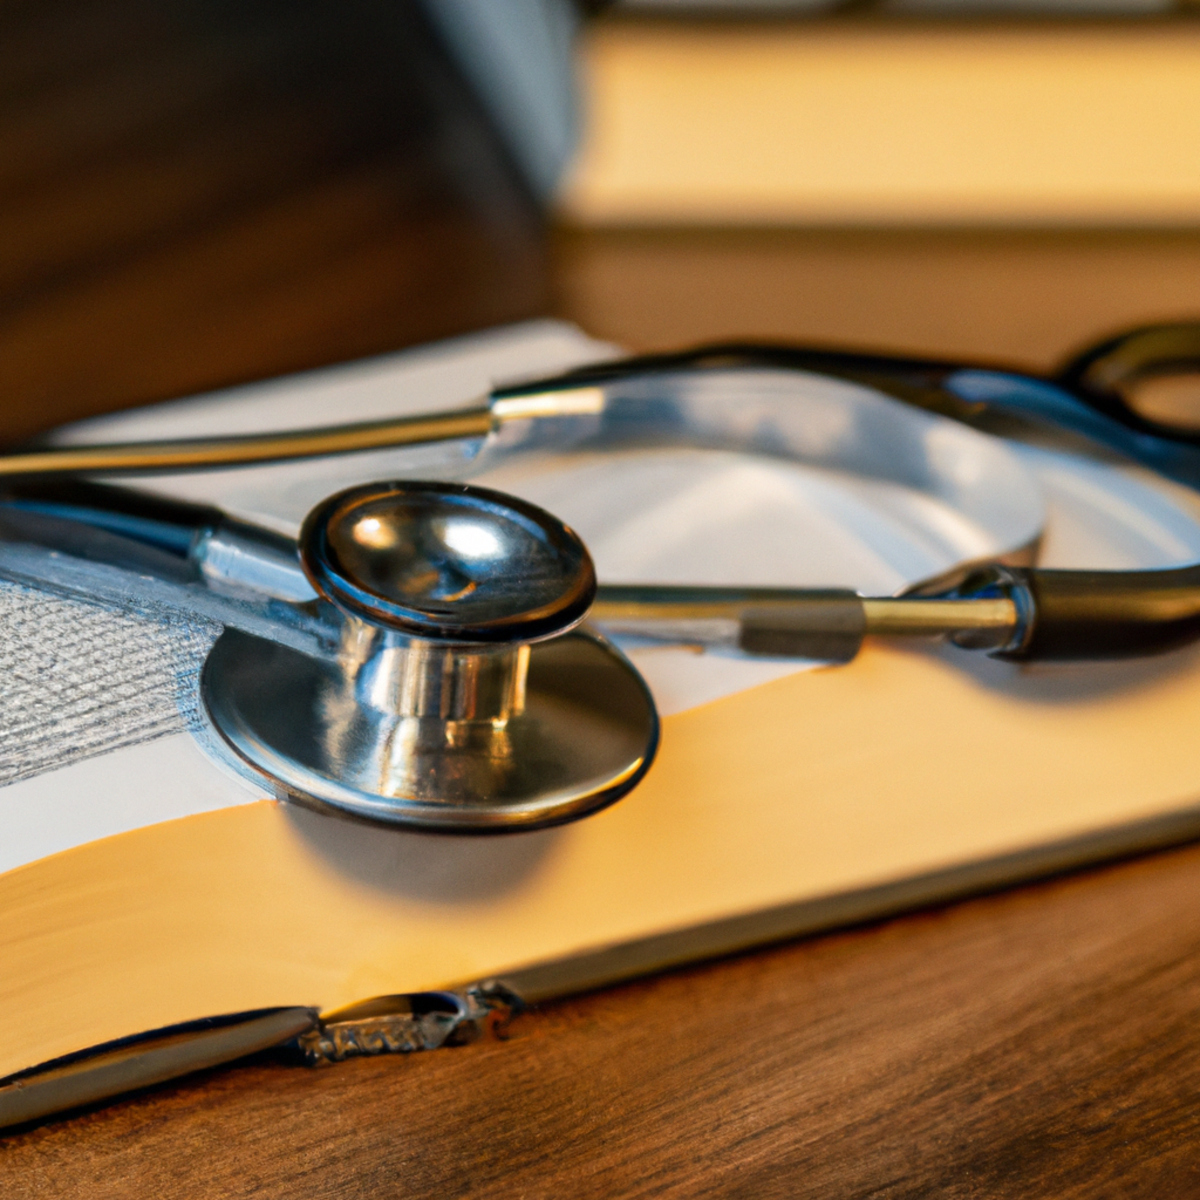 Close-up of stethoscope on table, symbolizing medical examination and heart health. Books and papers highlight research on Kawasaki Disease's impact on heart.